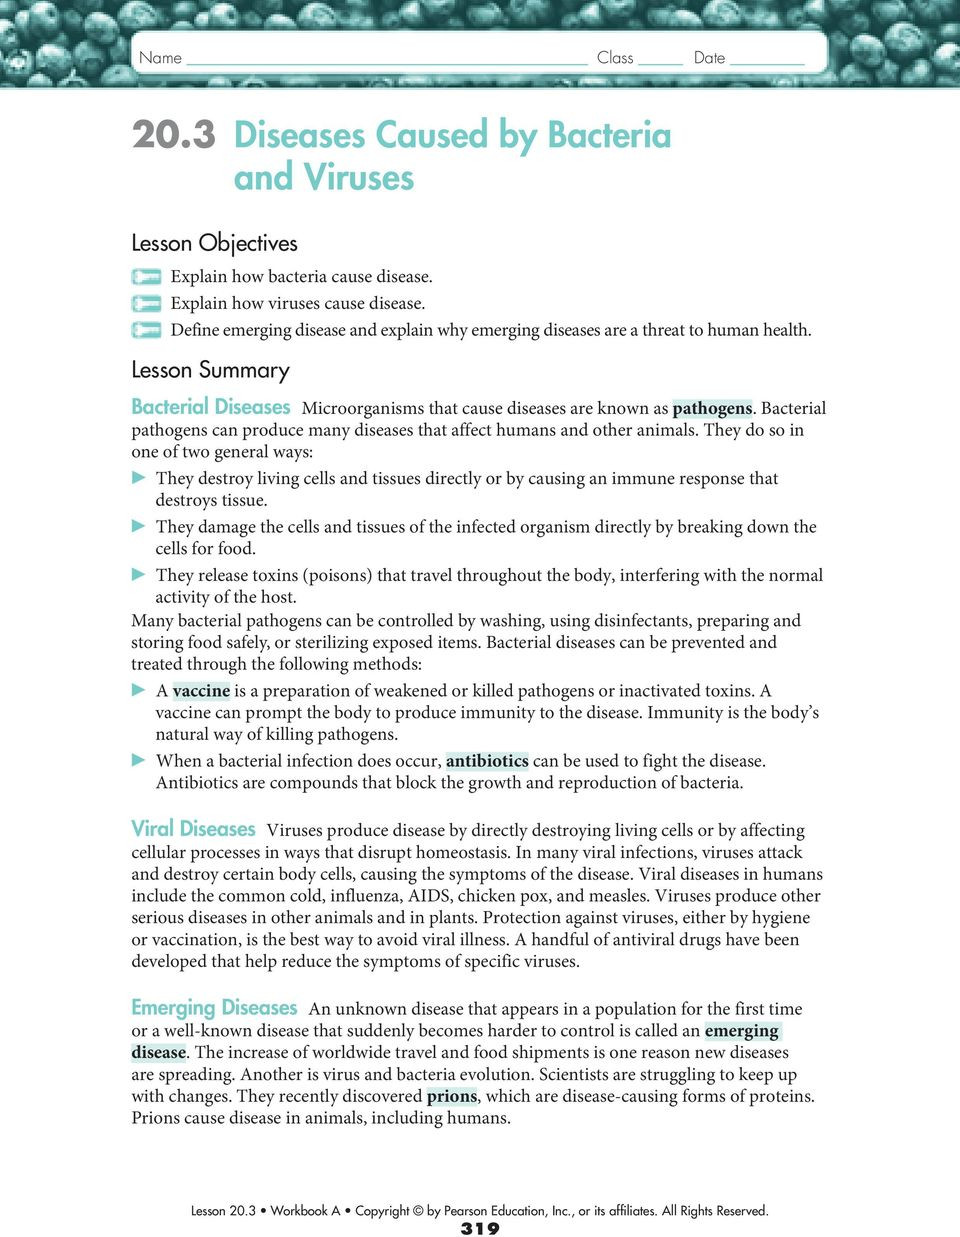 Virus and Bacteria Worksheet Answers 20 3 Diseases Caused by Bacteria and Viruses Pdf Free Download